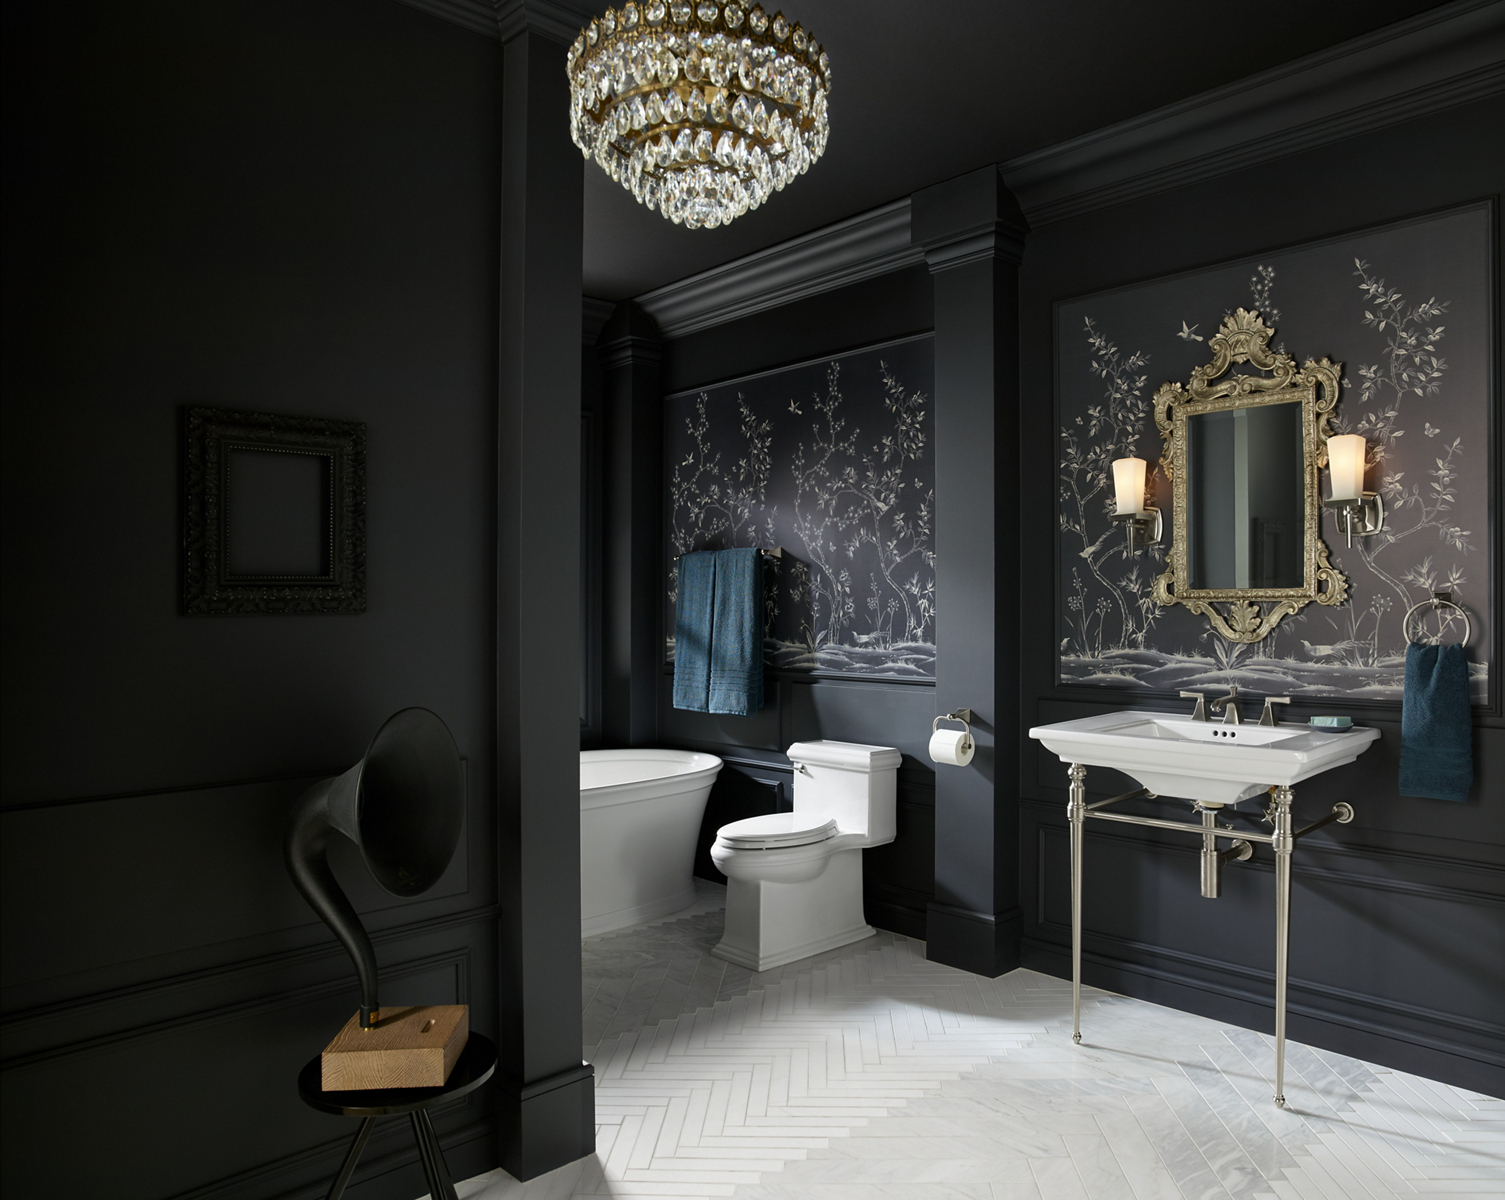 An ornate traditional bathroom in dark gray hues with brushed nickel hardware and white Memoirs collection products.